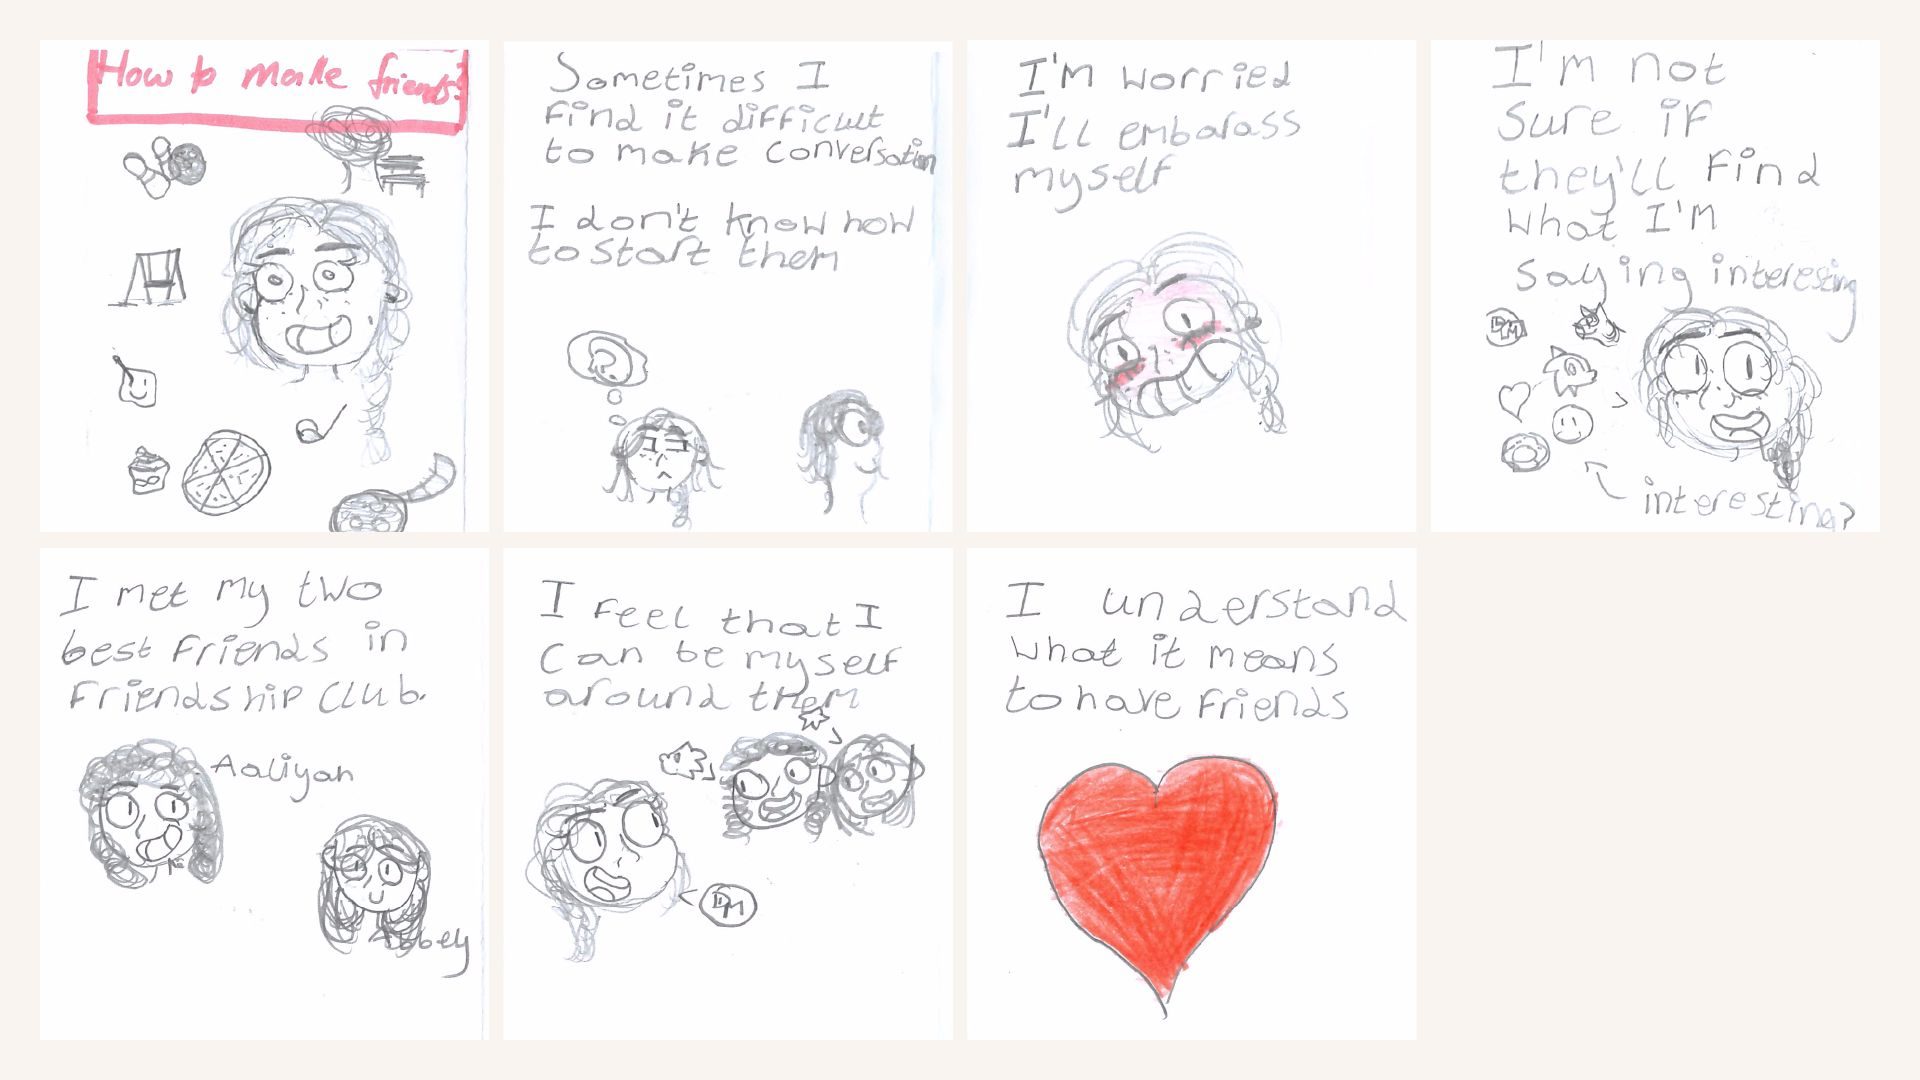 A child's cartoon strip describing how to make friends by finding common interests and being yourself.